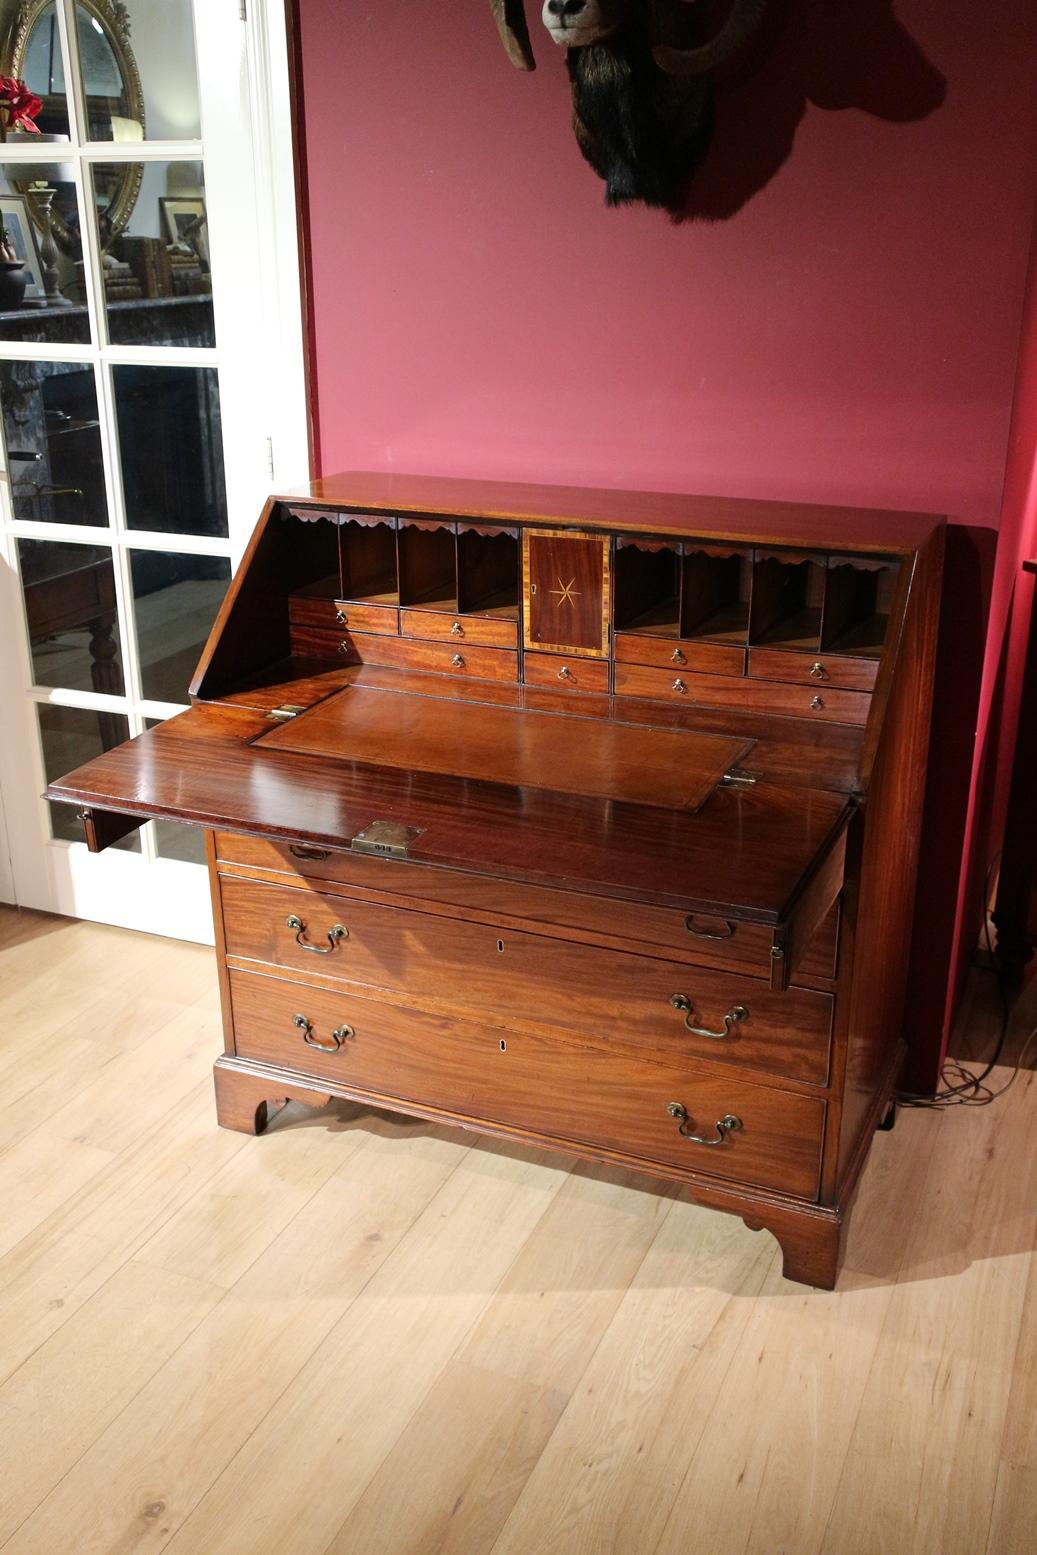 Beautiful antique mahogany bureau in perfect and completely original condition. The bureau is of sublime quality. After 200 years it is still in top condition. Beautiful mahogany and warm color. Original handles.

Origin: England

Period: